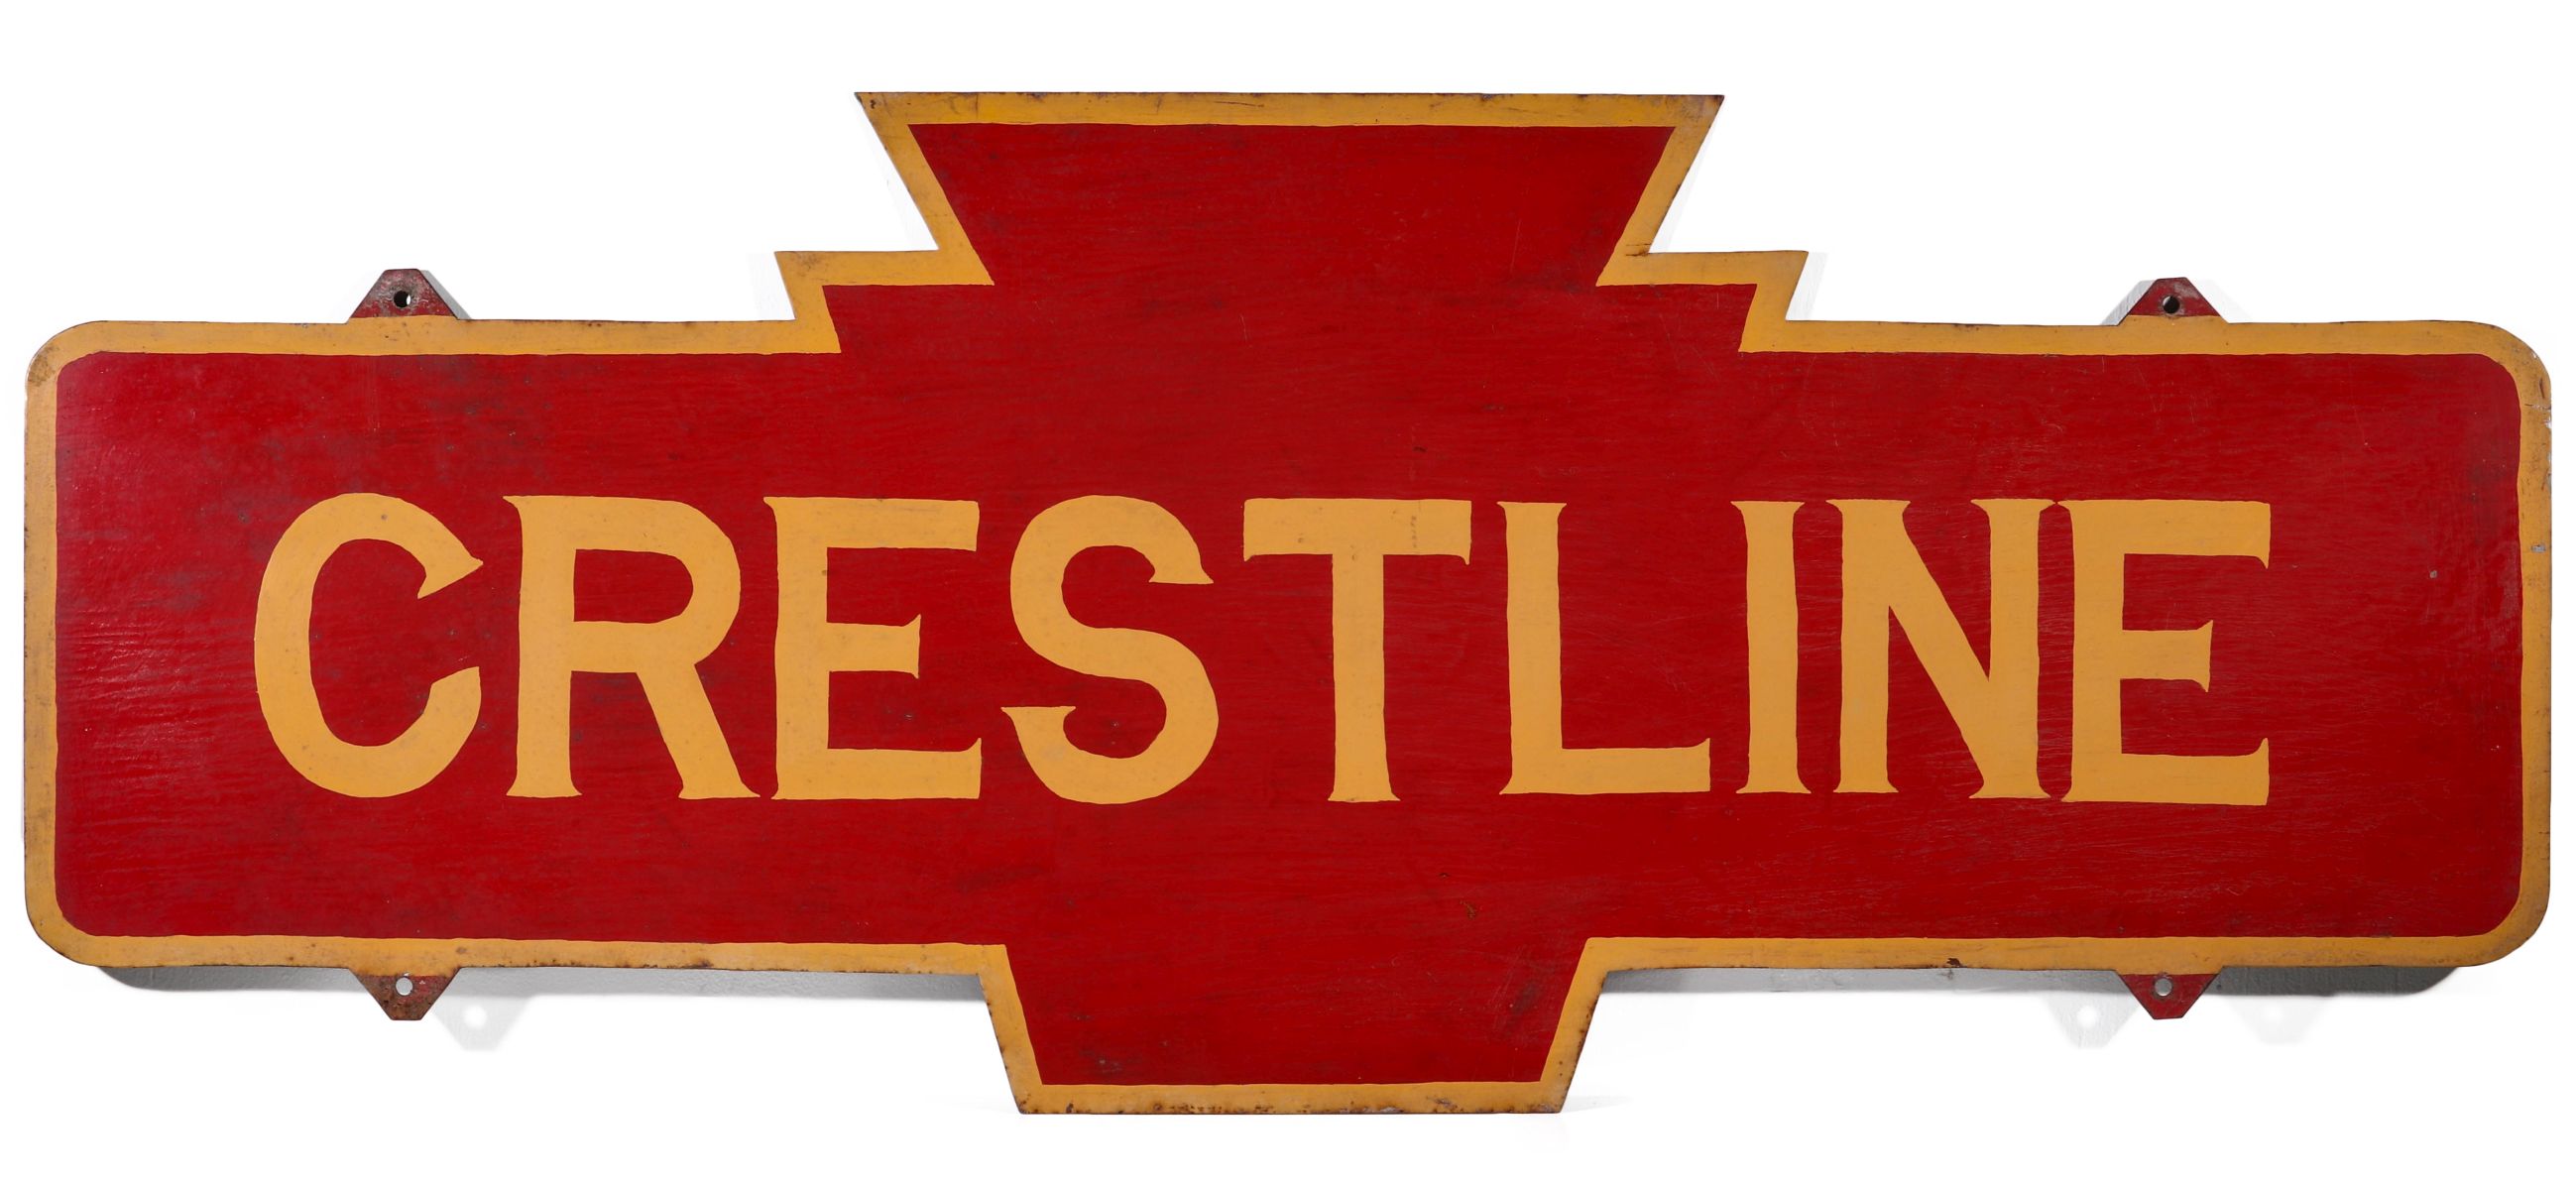 A PAINTED STEEL SIGN FROM THE PRR STATION CRESTLINE OH